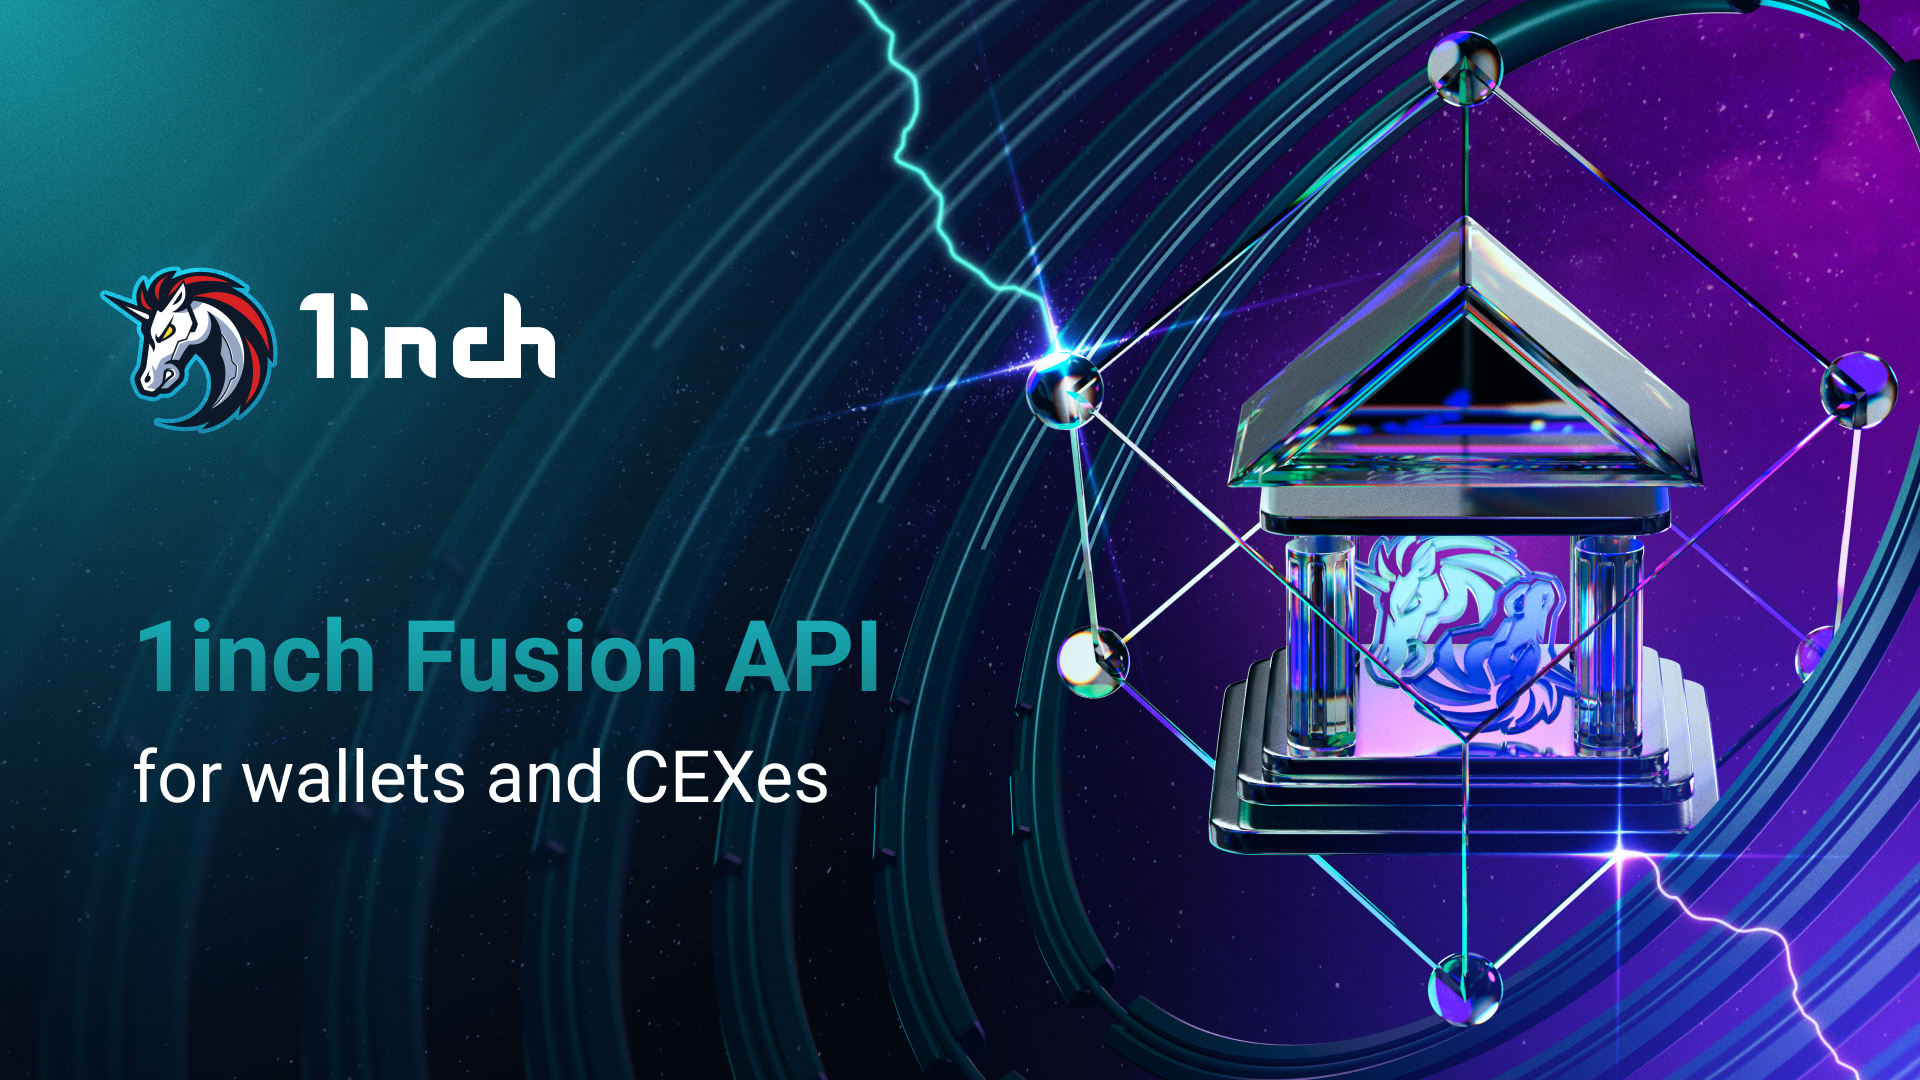 The 1inch Fusion API: revving up the performance of wallets and CEXes